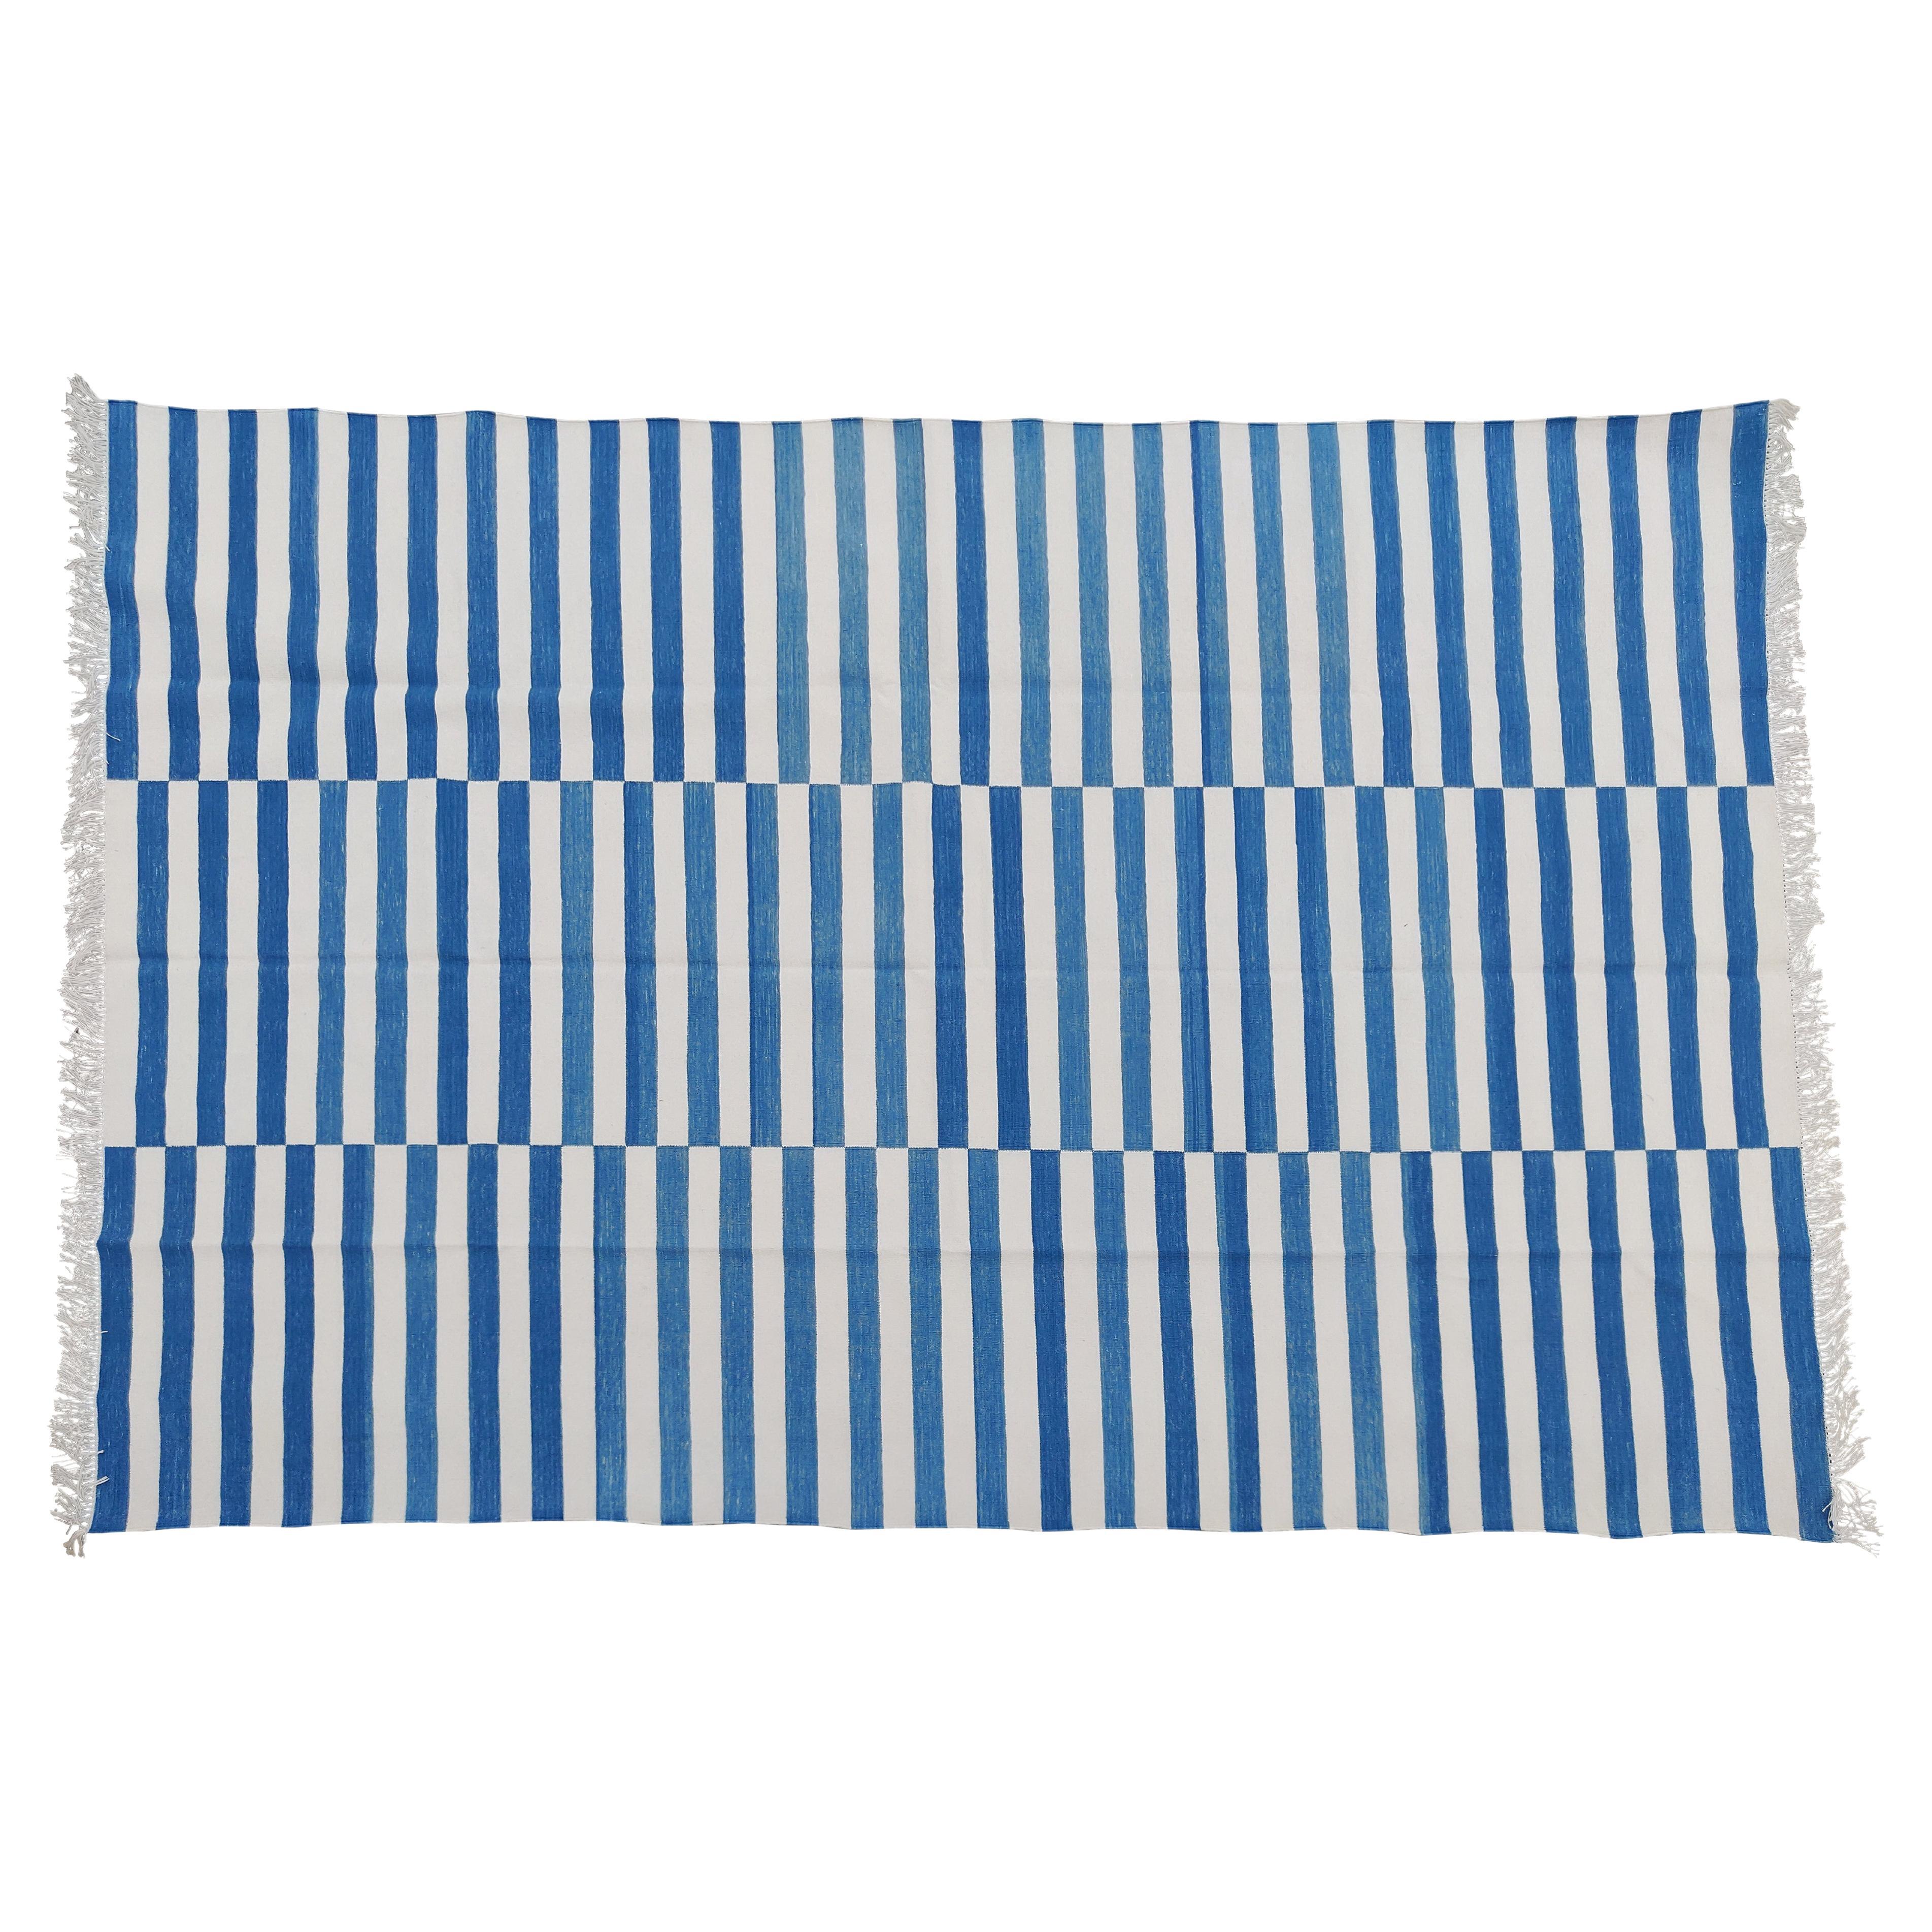 Handmade Cotton Area Flat Weave Rug, Blue And White Striped Indian Dhurrie Rug For Sale